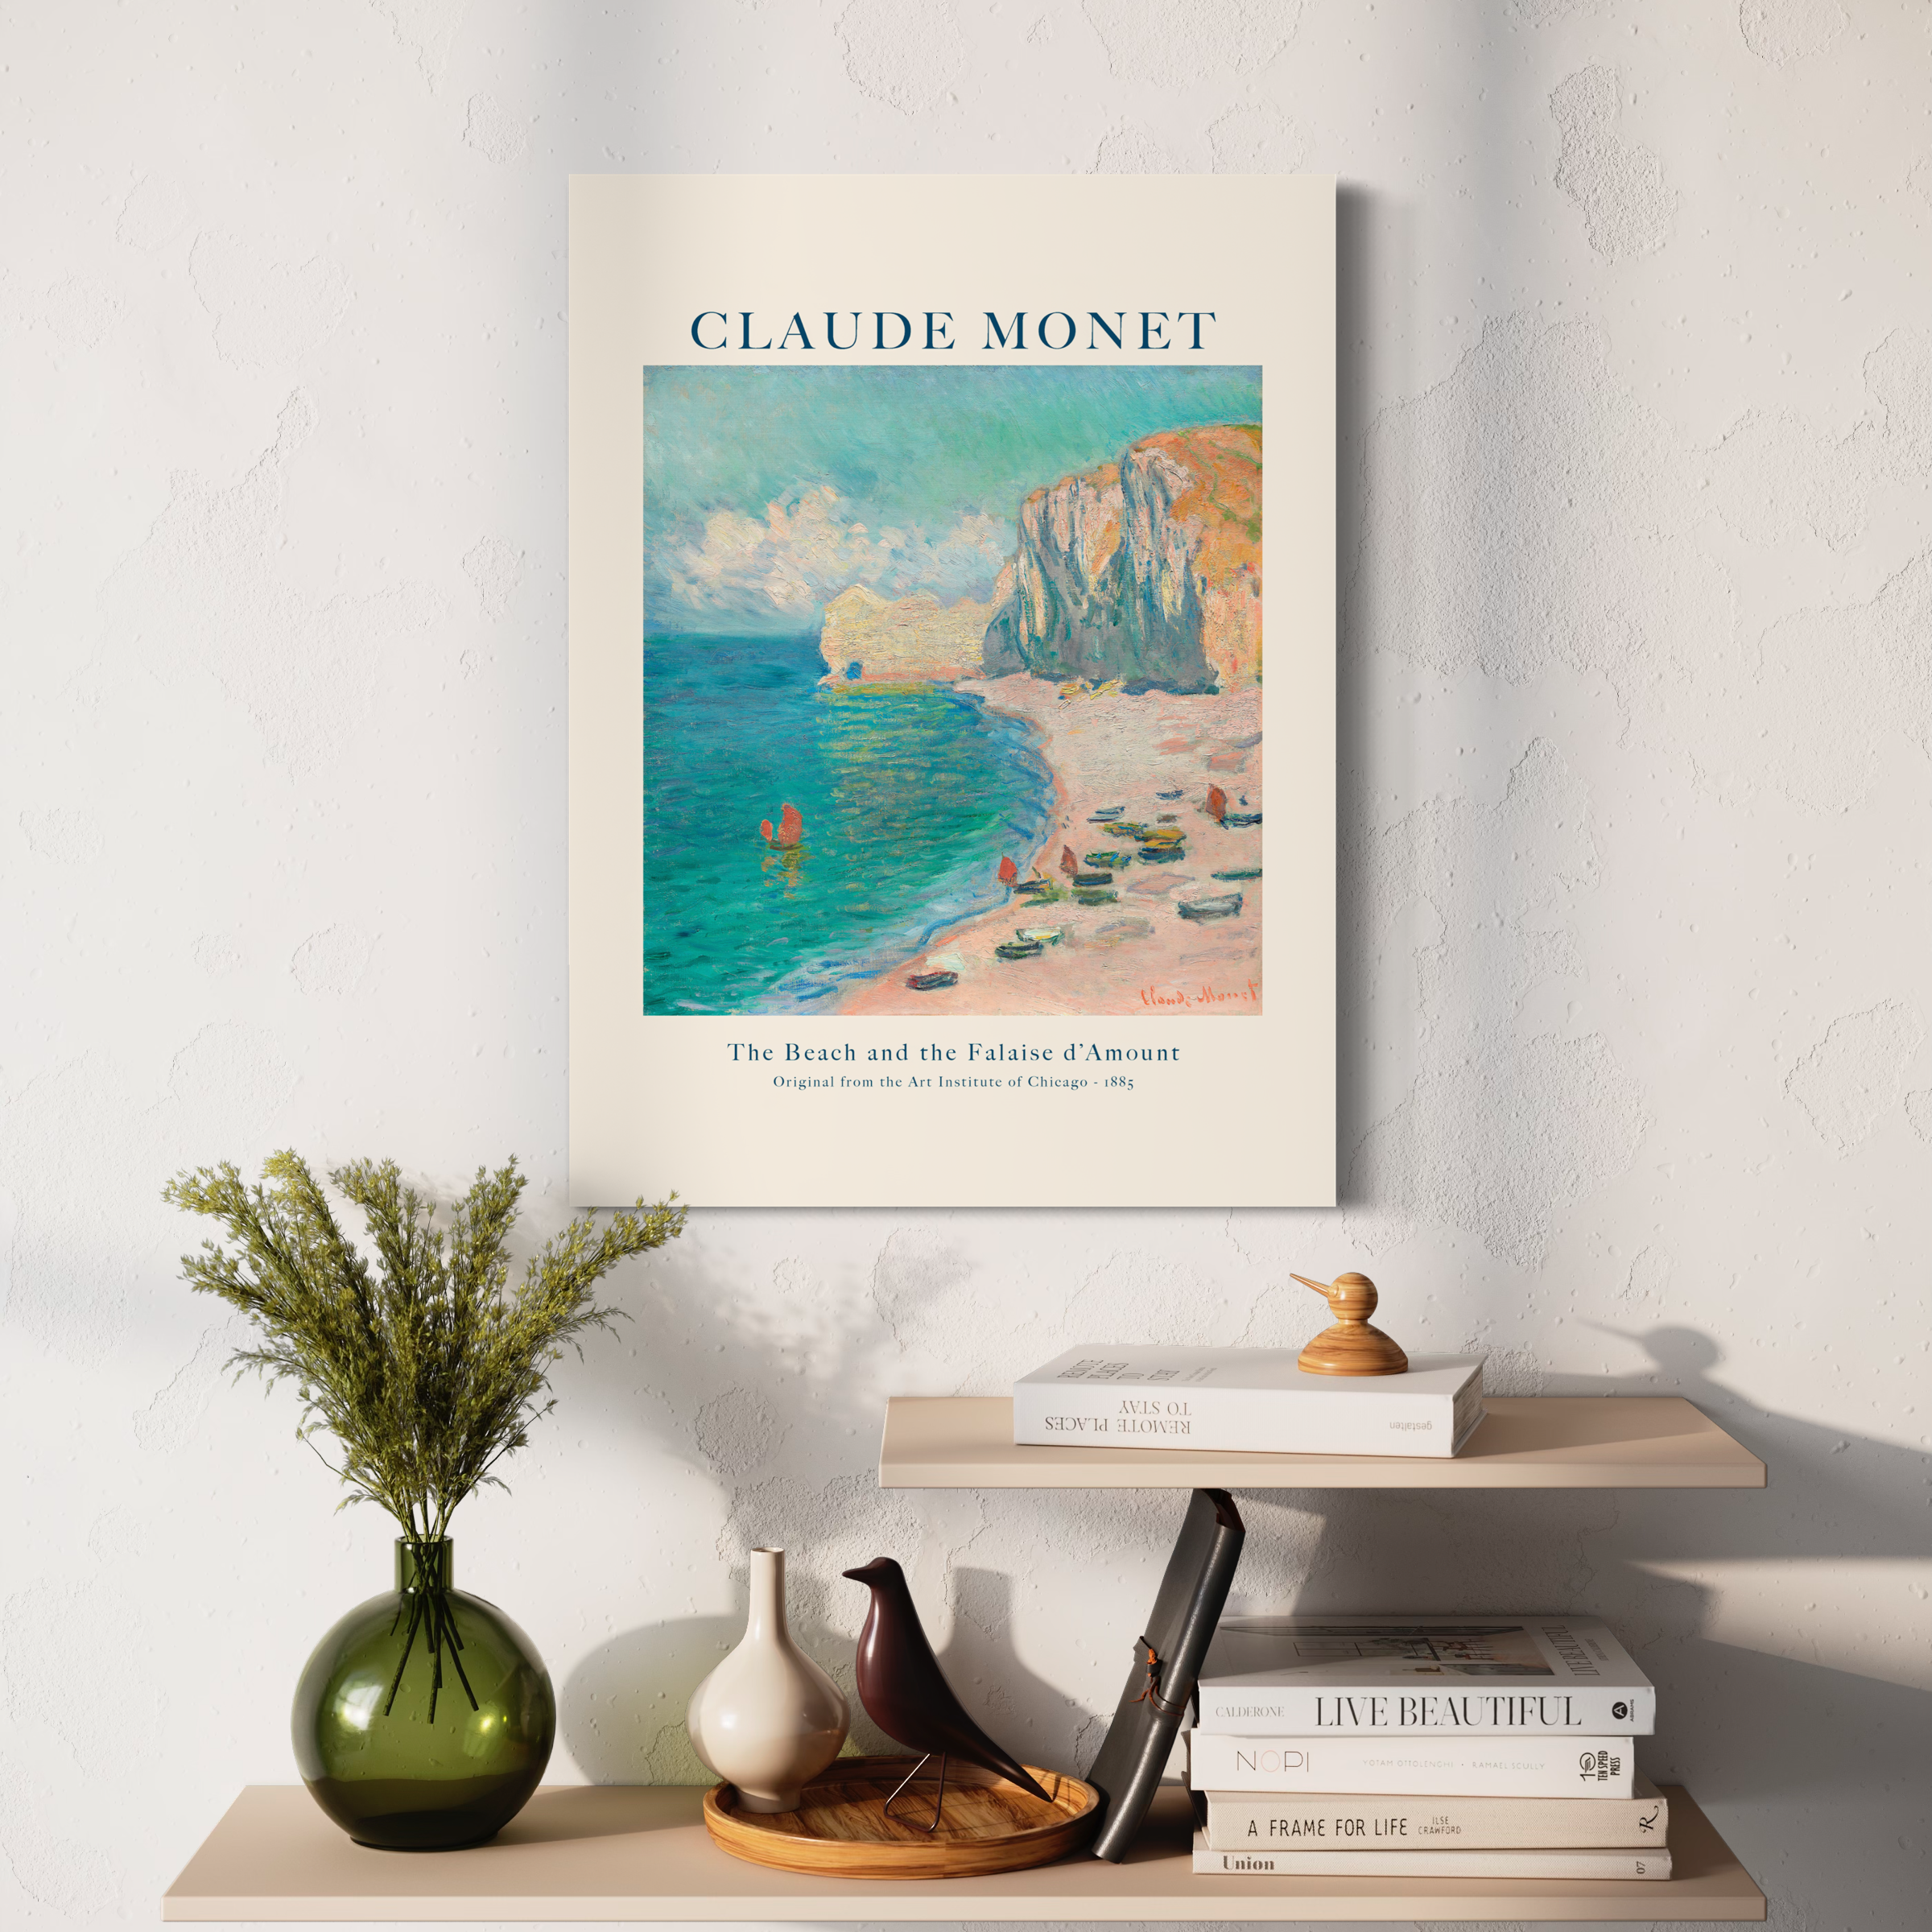 Special Edition Canvas - Claude Monet - The Beach and the Falaise d´Amount